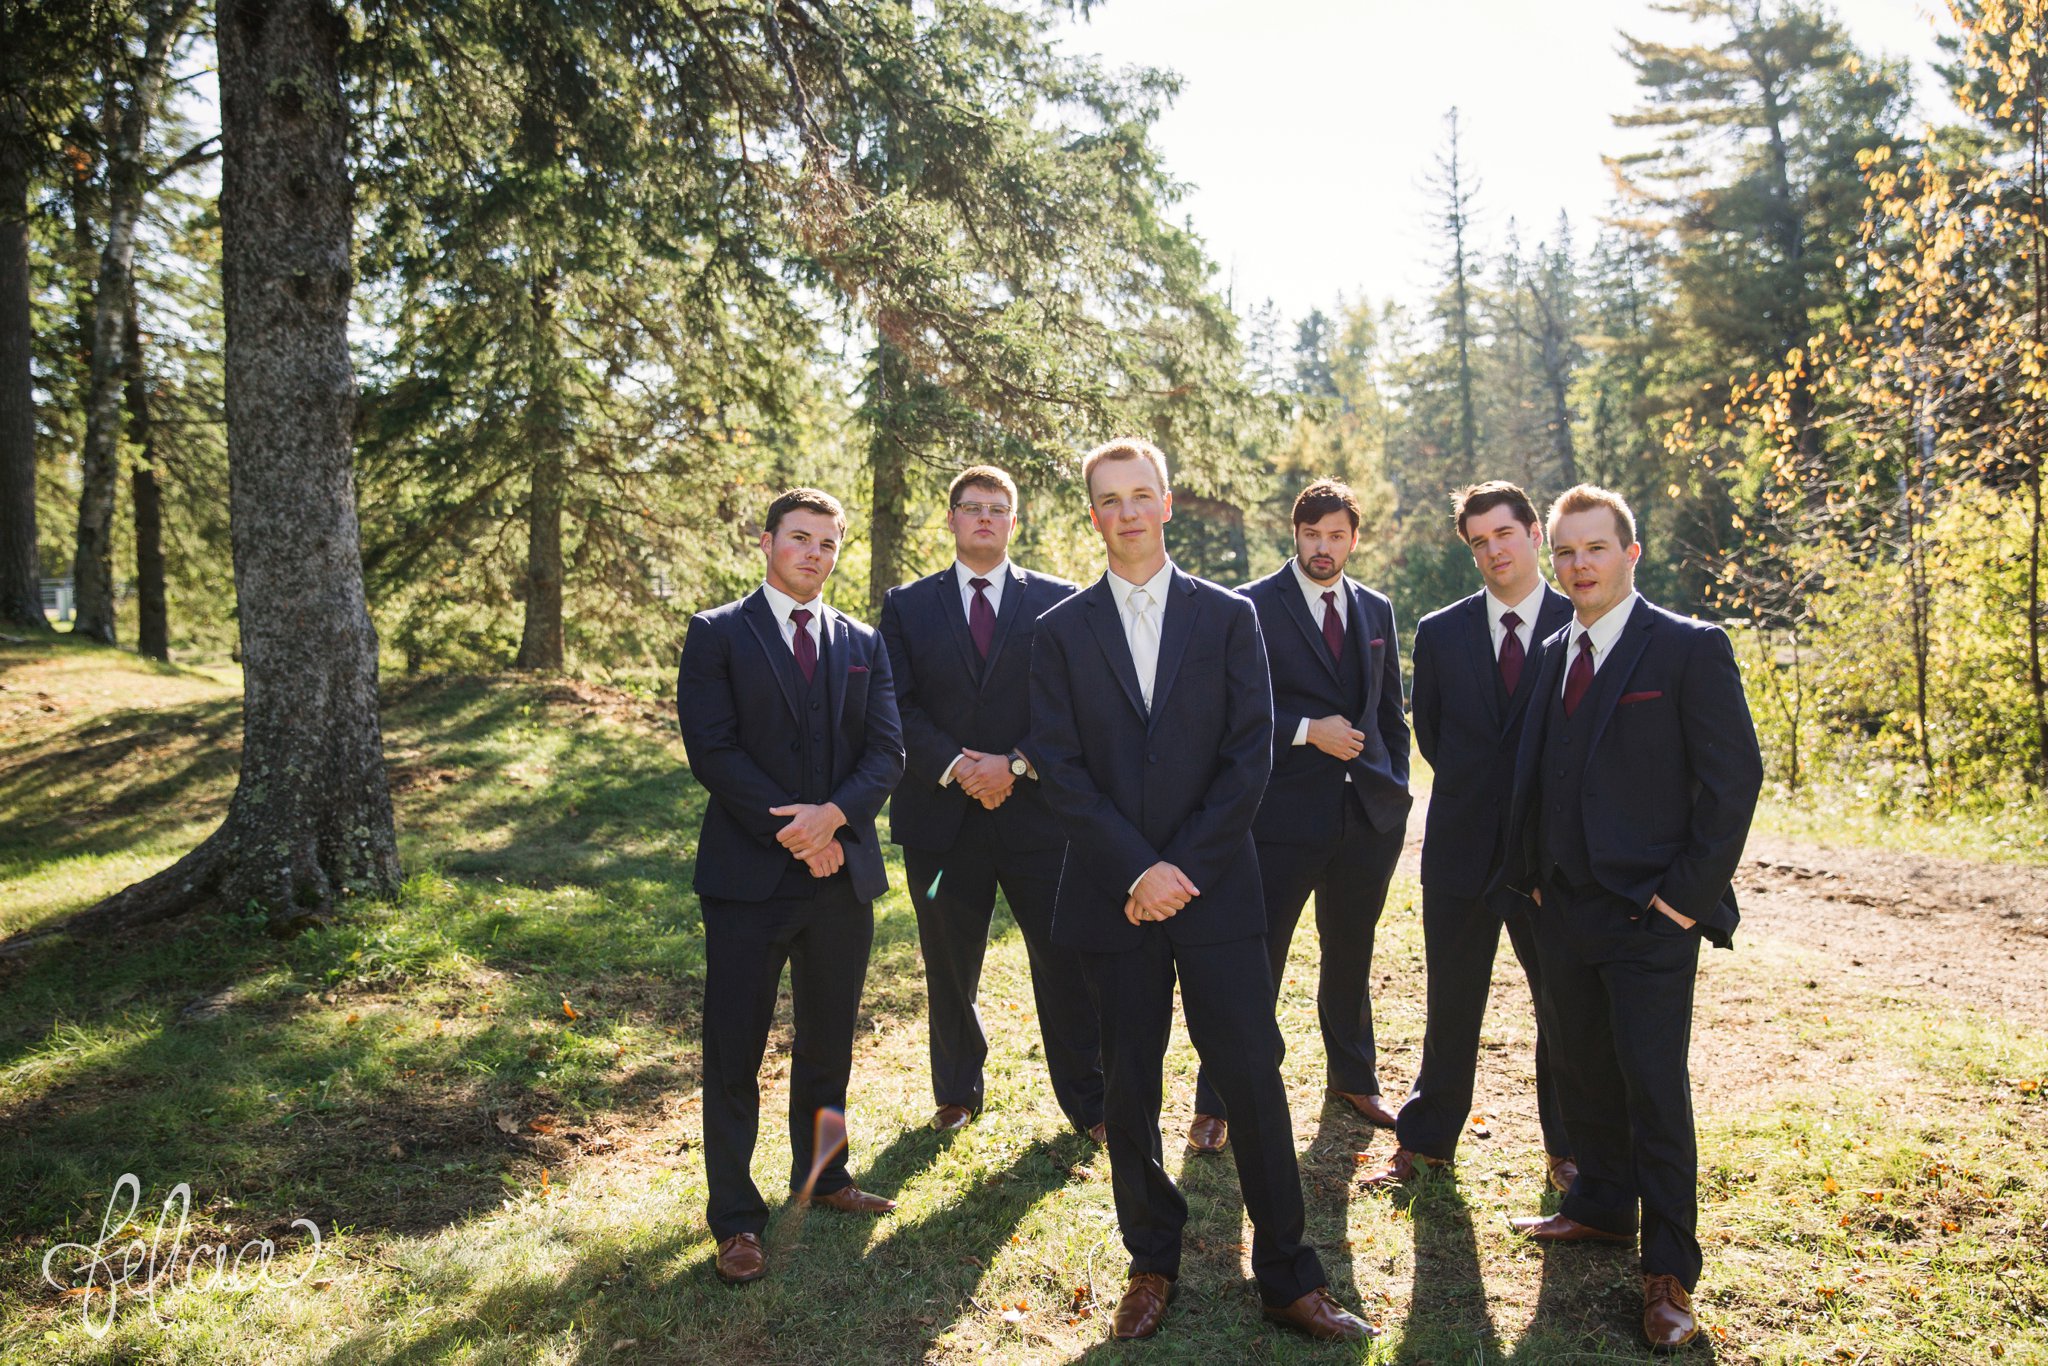 Wedding | Wedding Photography | Wedding Photos | Felicia the Photographer | Images by feliciathephotographer.com | Travel Photographer | Duluth | St. Benedict Church | Groomsmen Portrait | Nature Background | Crossed Arms | Strong Pose 